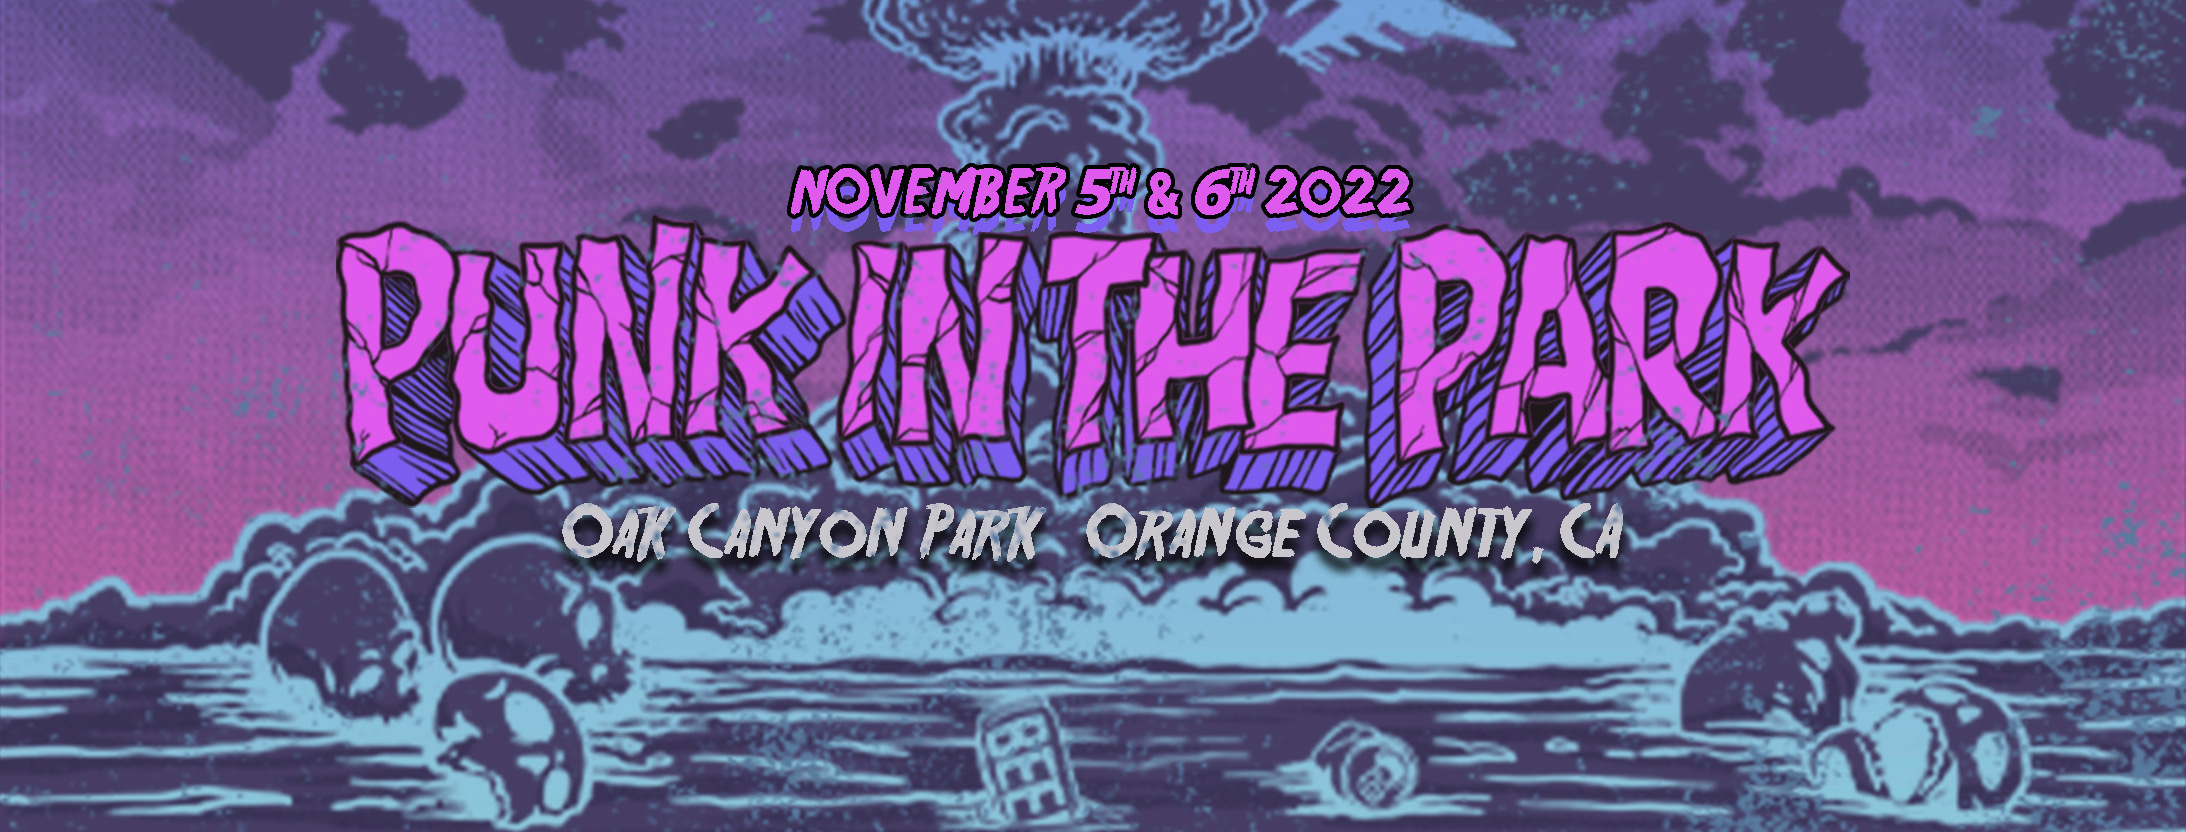 Punk In The Park Draws Nearly 20,000 Fans To Nov. 5 & 6 Music & Craft Beer Festival